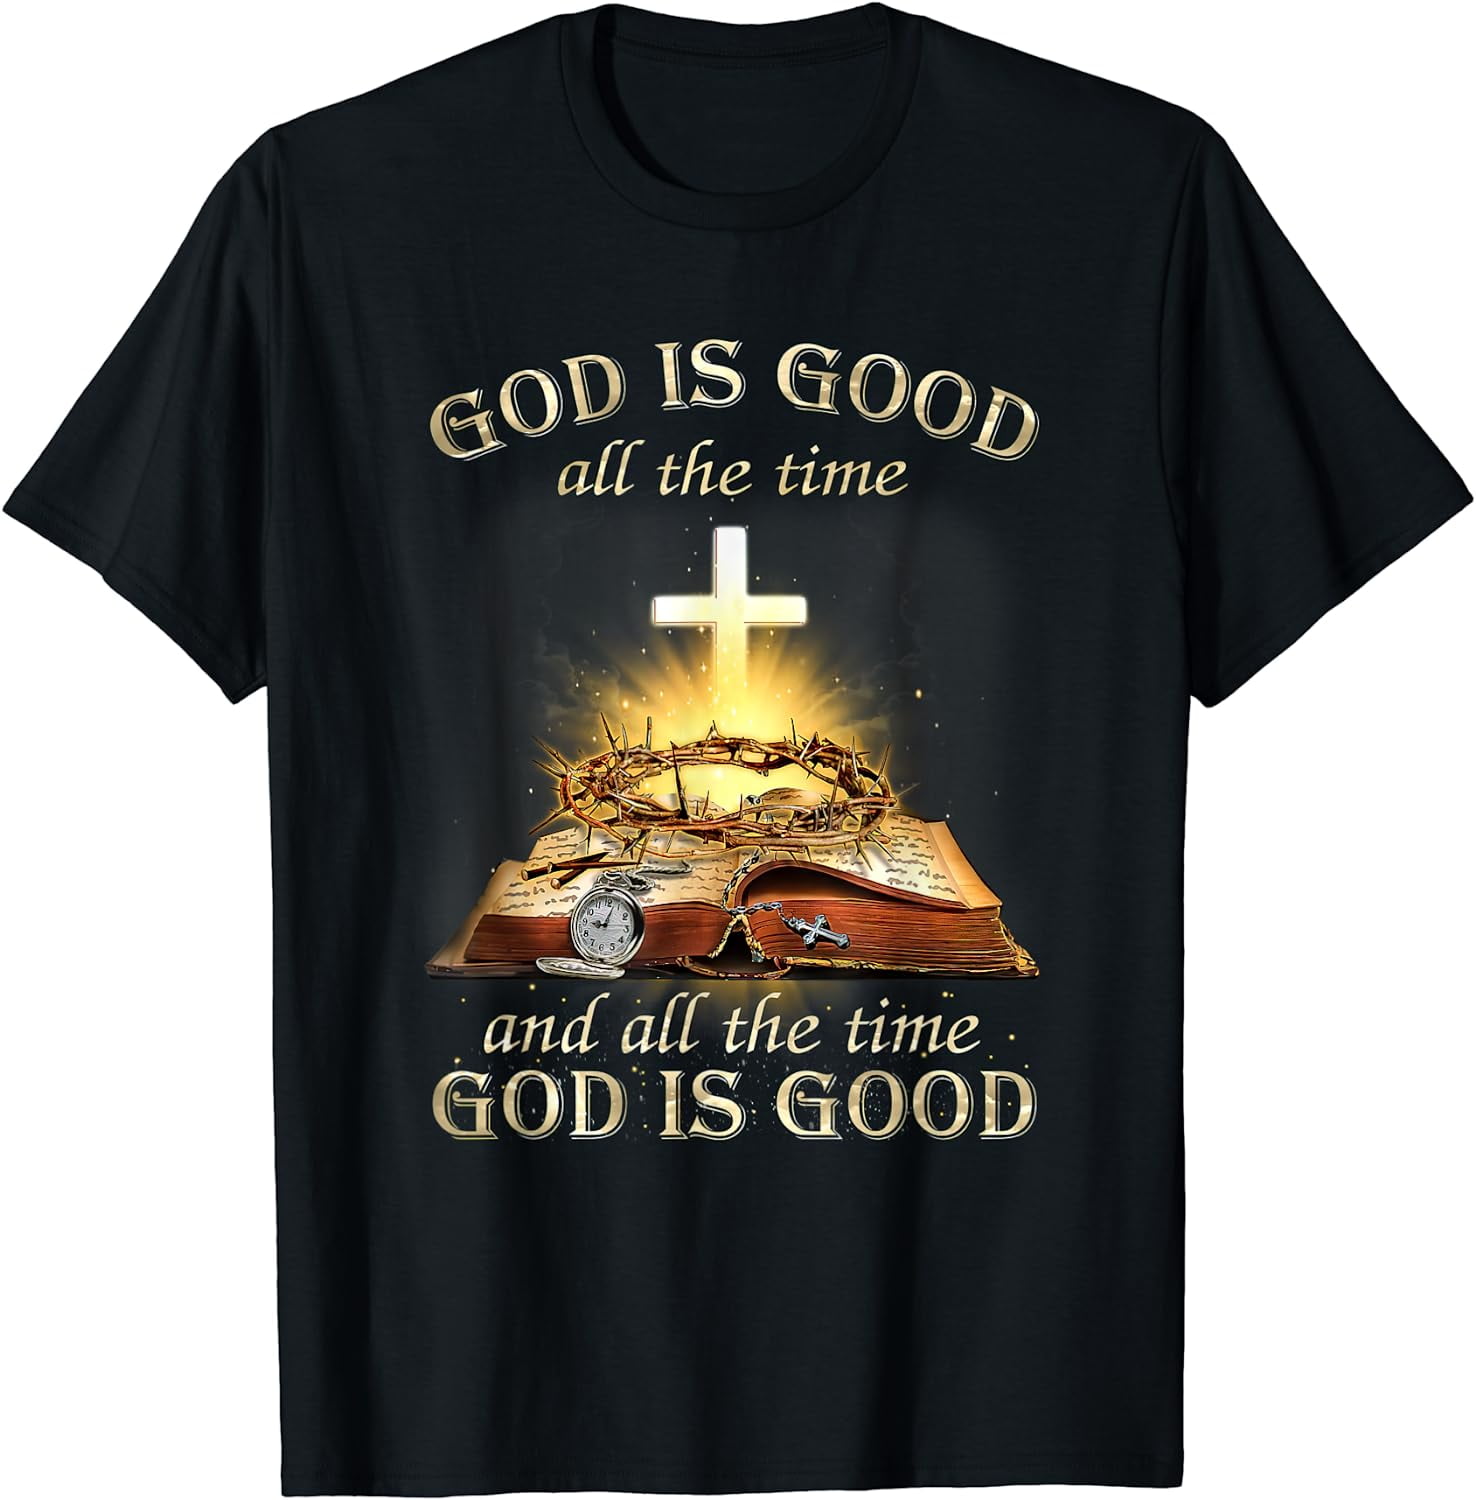 God Is Good All The Time And All The Time God Is Good T-Shirt - Walmart.com